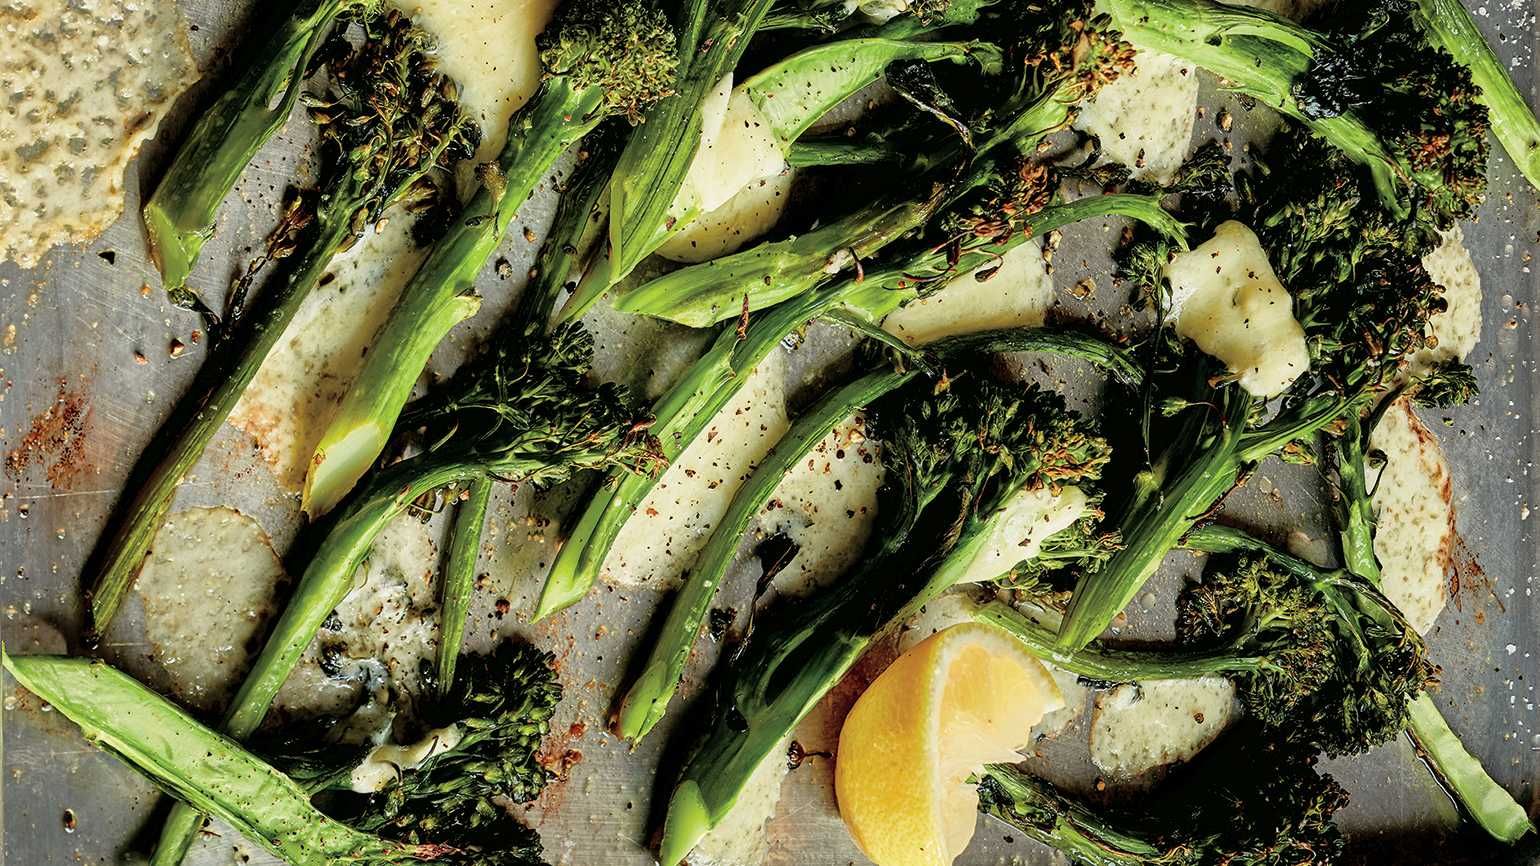 Ina Garten's Roasted Broccolini and Cheddar (photo by Quentin Bacon)